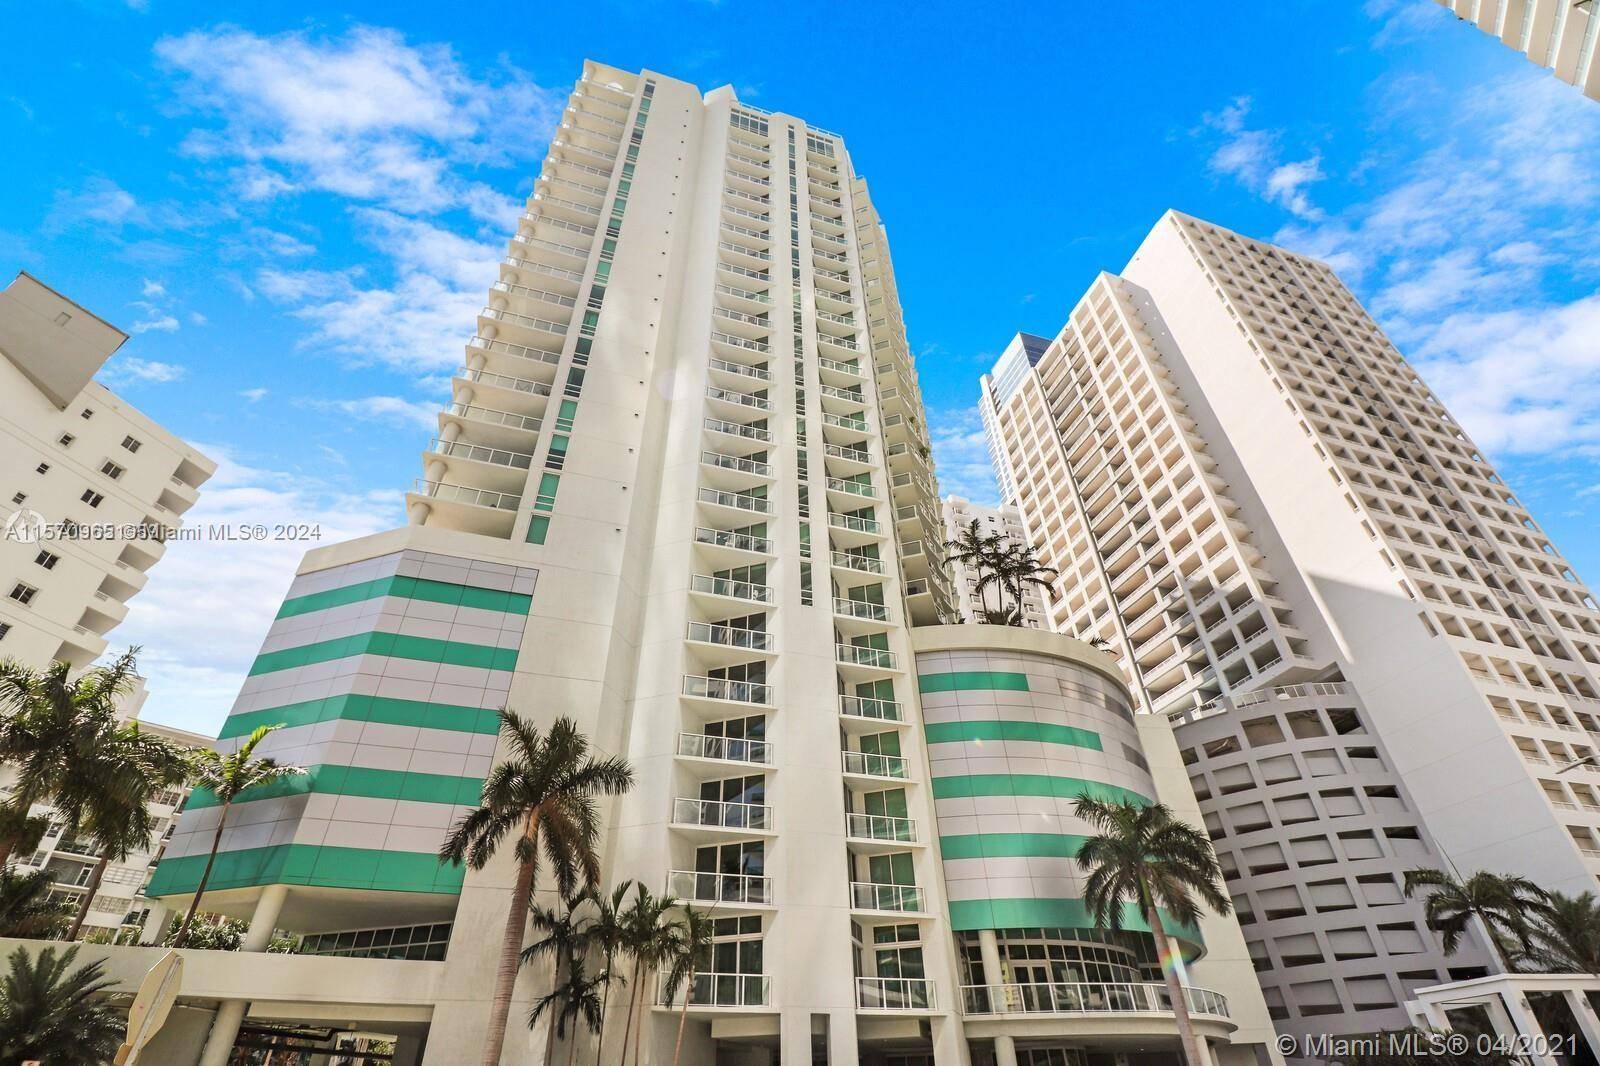 EXQUISITE CONDO IN THE HEART OF BRICKELL WITH EXTRAORDINARY VIEWS OF THE BAY AND CITY.